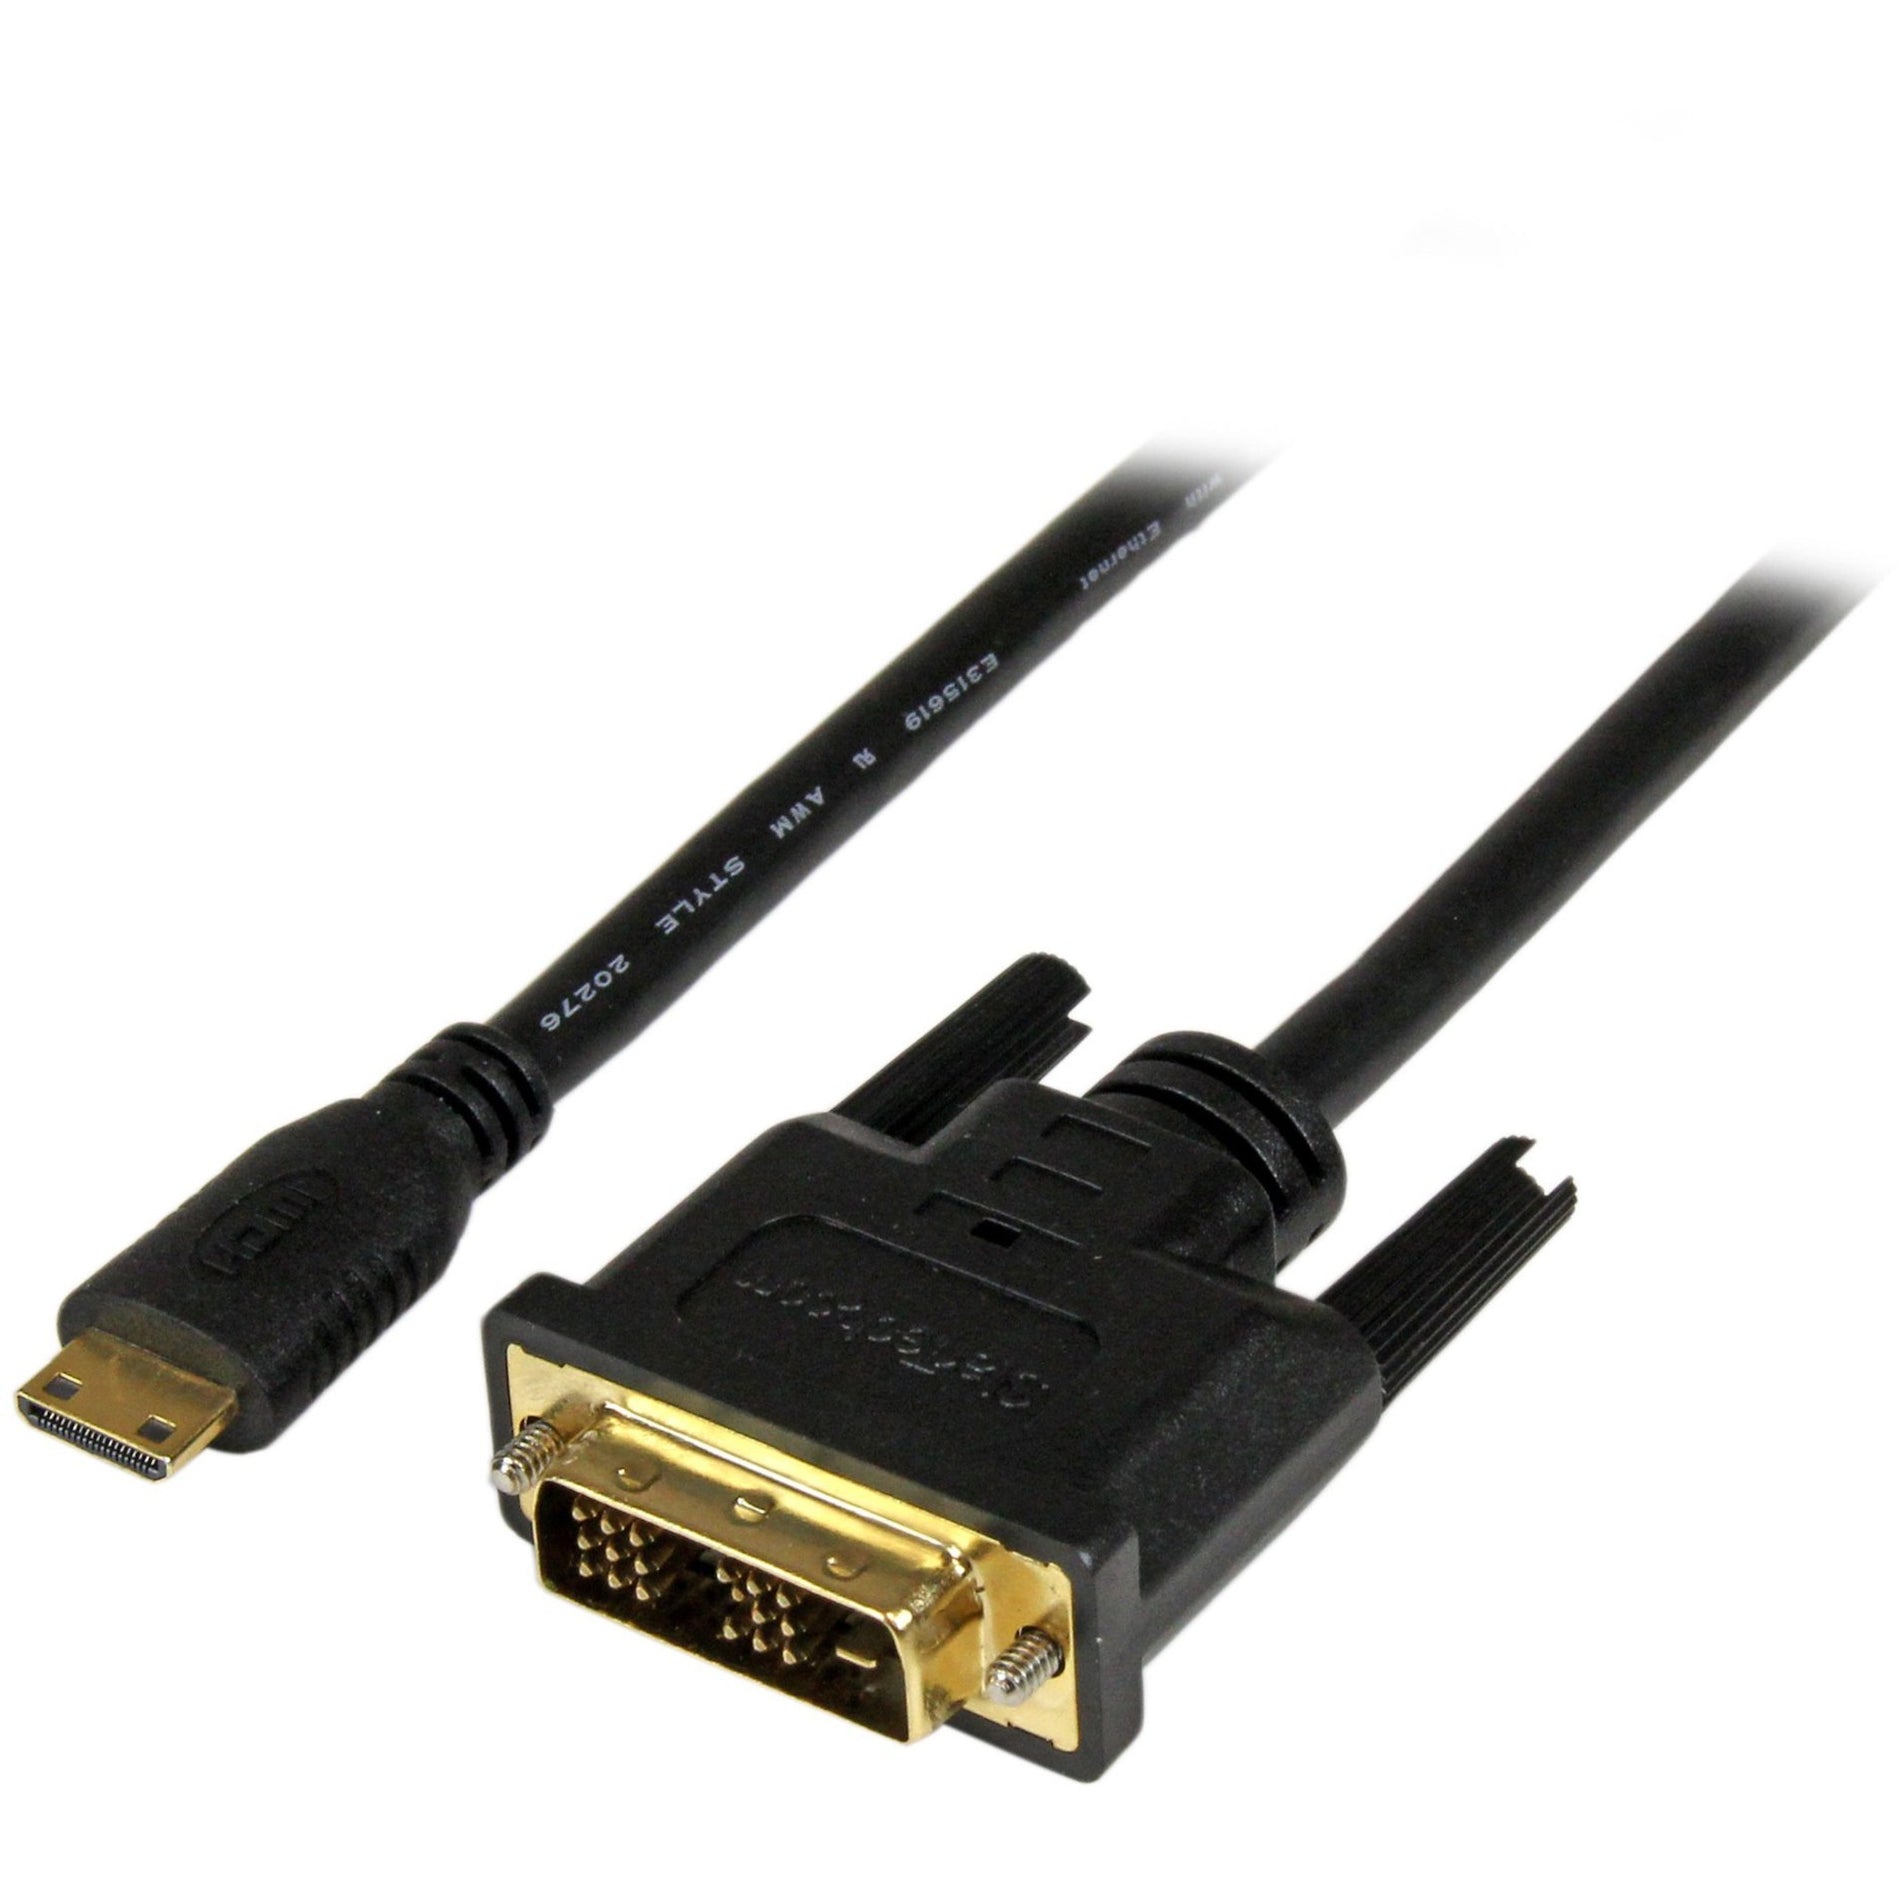 StarTech.com HDCDVIMM2M 2m Mini HDMI to DVI-D Cable - M/M, Active, Passive, EMI Protection, Fray Resistant, Damage Resistant, Molded, Strain Relief, 6.56 ft Cable Length, Gold Plated Connectors, 1920 x 1200 Supported Resolution